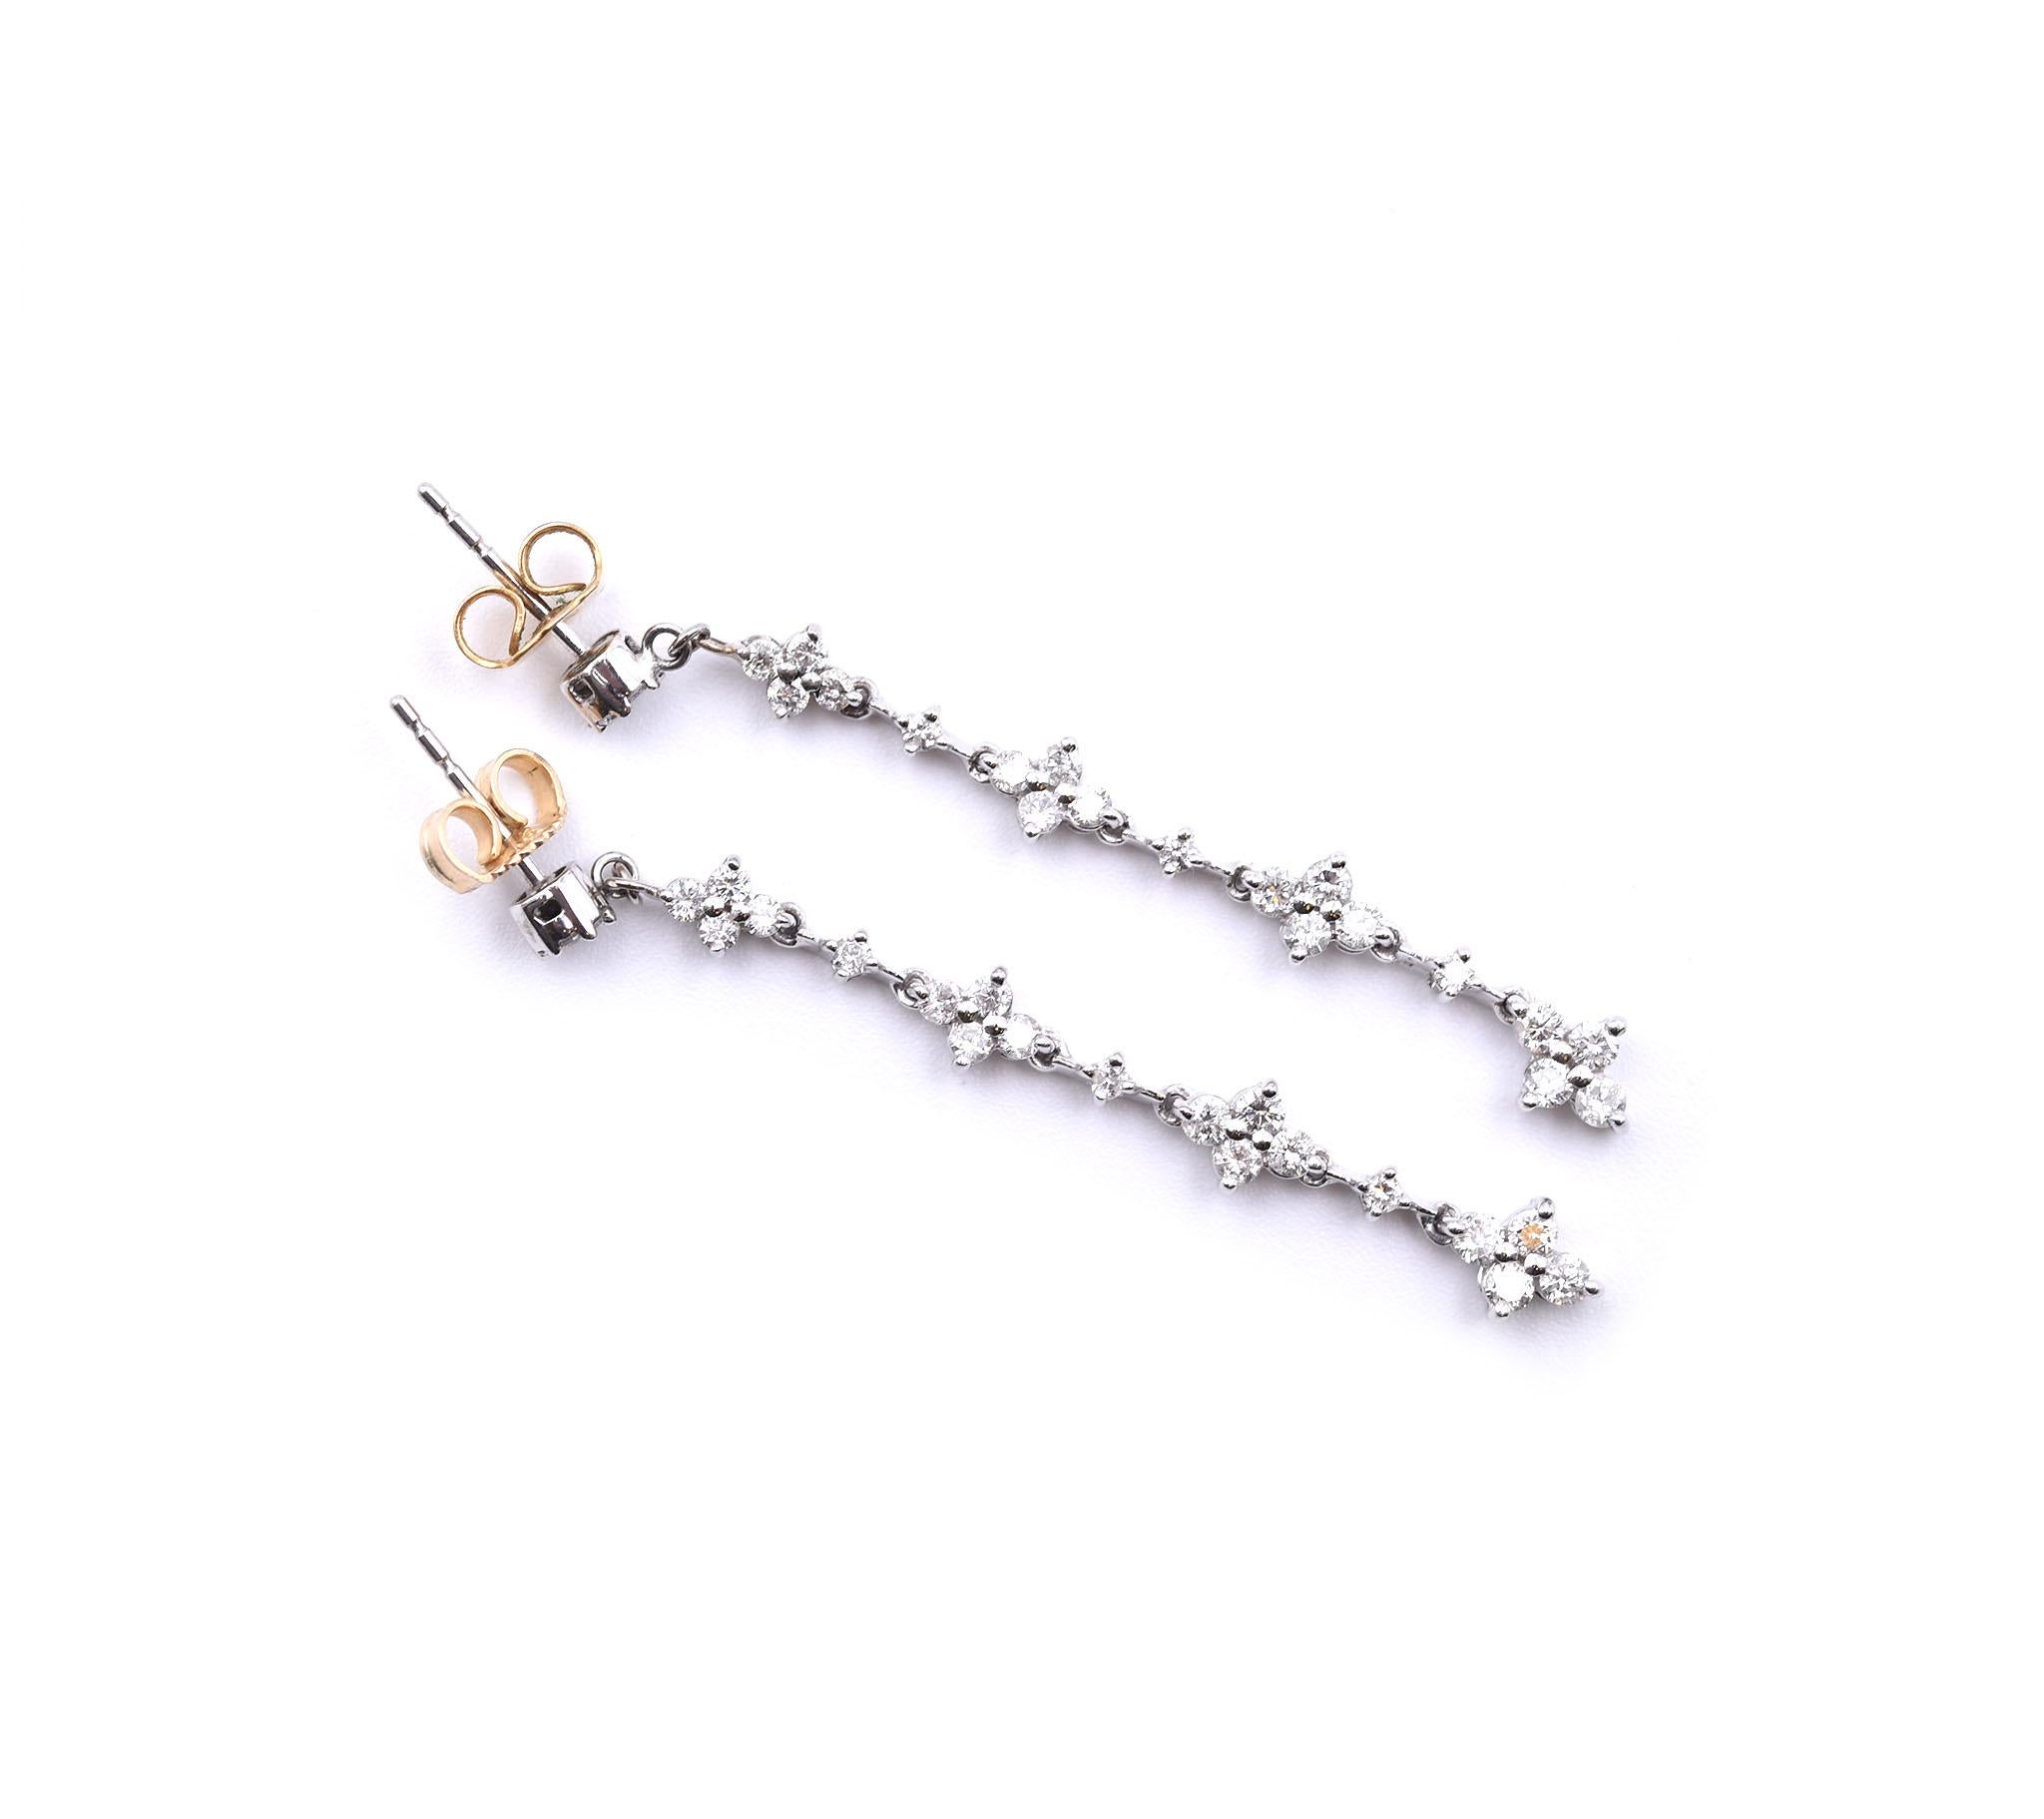 Designer: custom design
Material: 14k white gold
Diamonds: 52 round brilliant cuts = 1.00 carat weight
Dimensions: each earring is 2-inch long
Fastenings: friction backs
Weight: 3.26 grams

